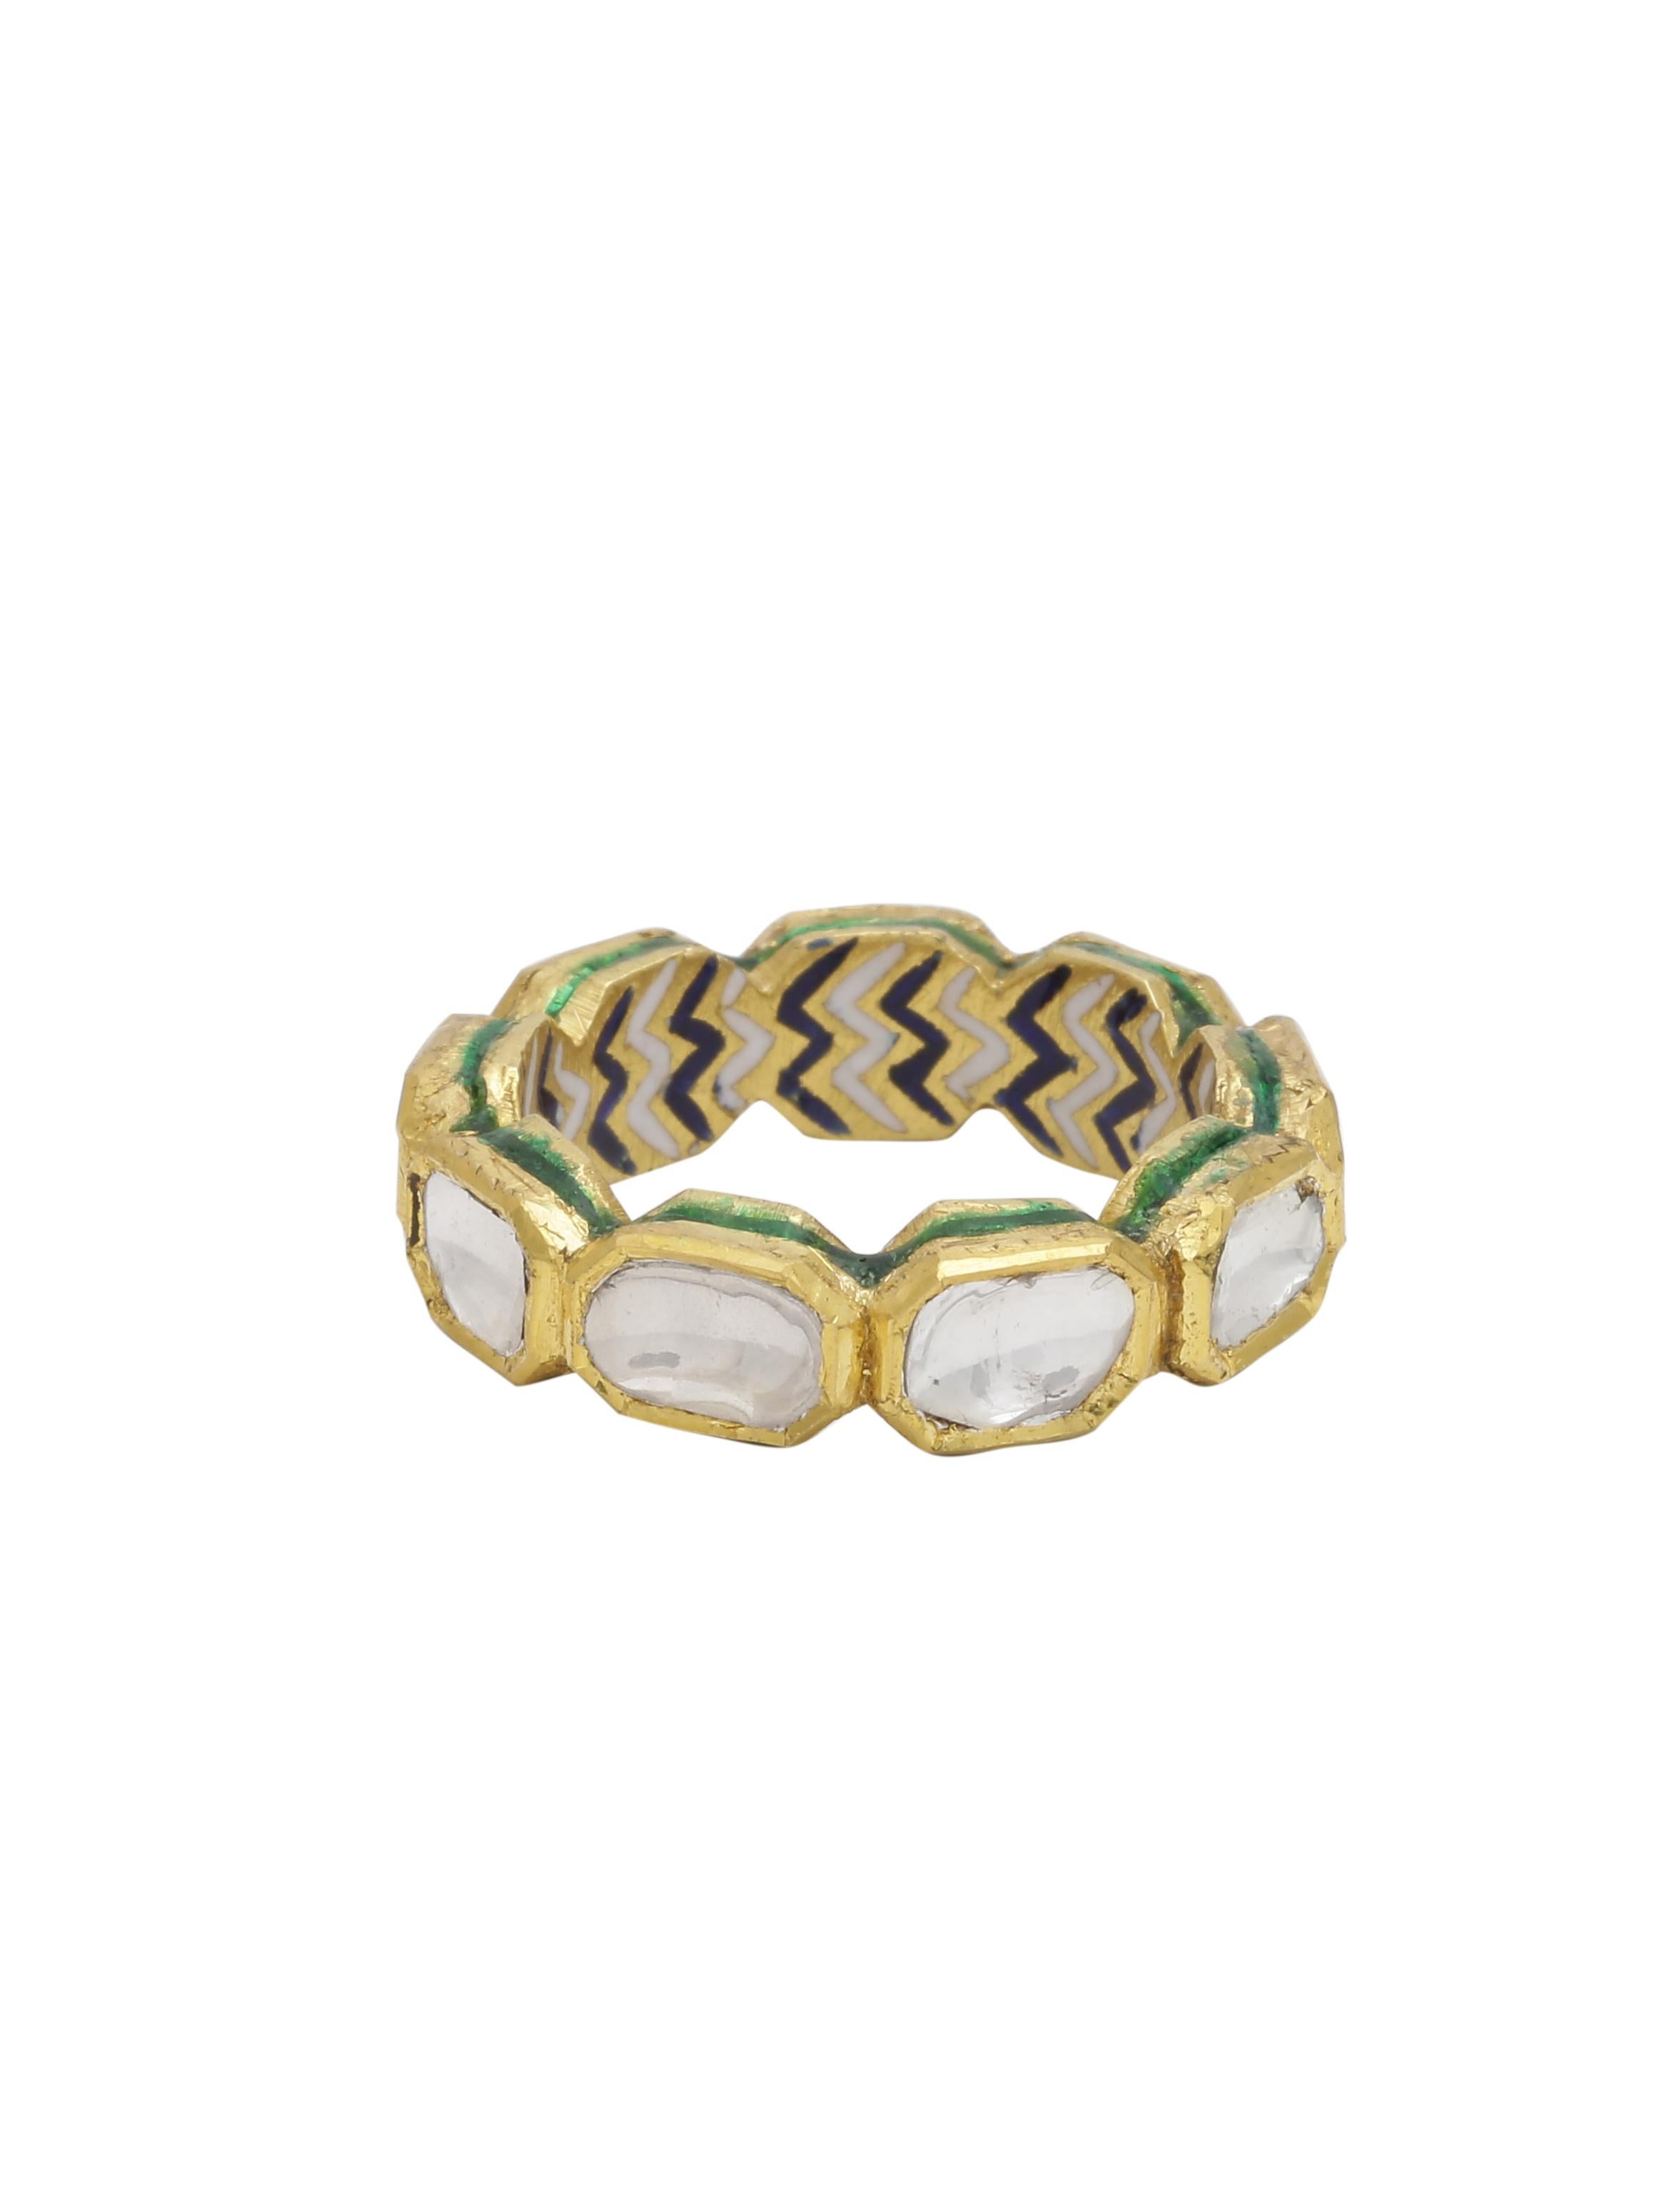 A blend of Indian Artistic jewellery and the classic eternity band.
The beautiful ring is Handmade in 18K Gold and has 1.40 carats of diamonds with enamel work inside and on the side. Each Diamond is set by hand using 'Kundan' which is the purest